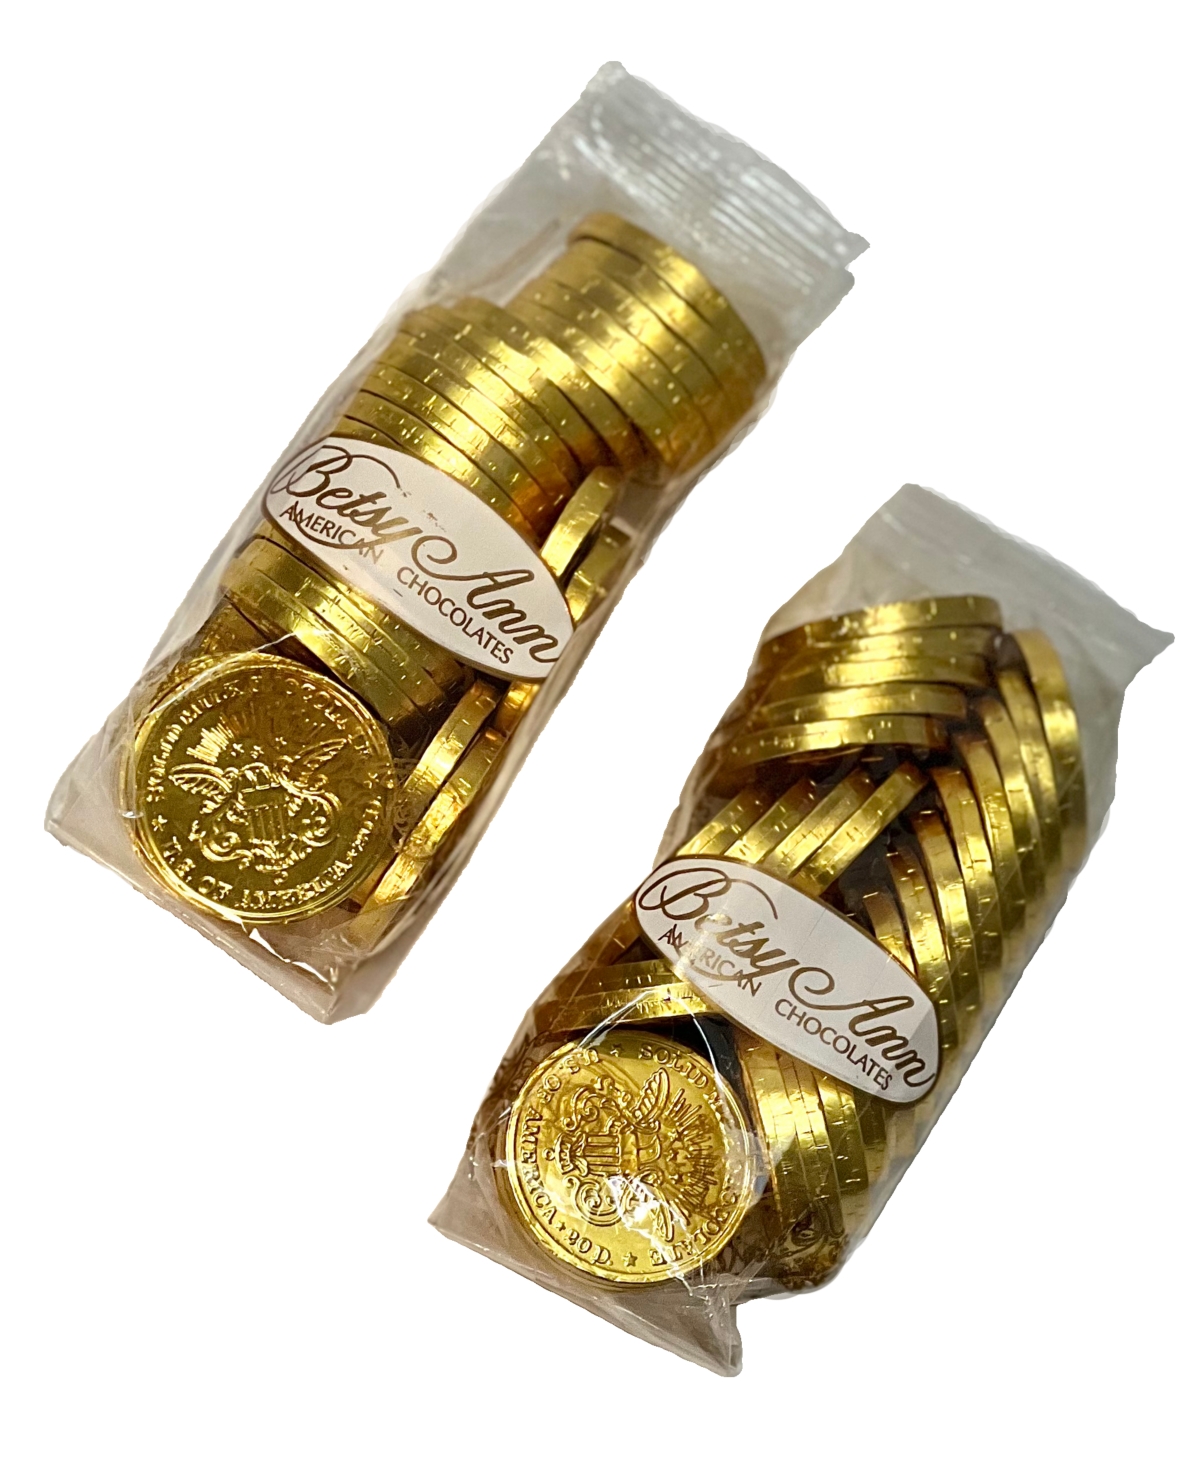 Betsy Ann Chocolates Betsy Ann 8 oz Milk Chocolate Foil Wrapped Coins, Pack Of 2